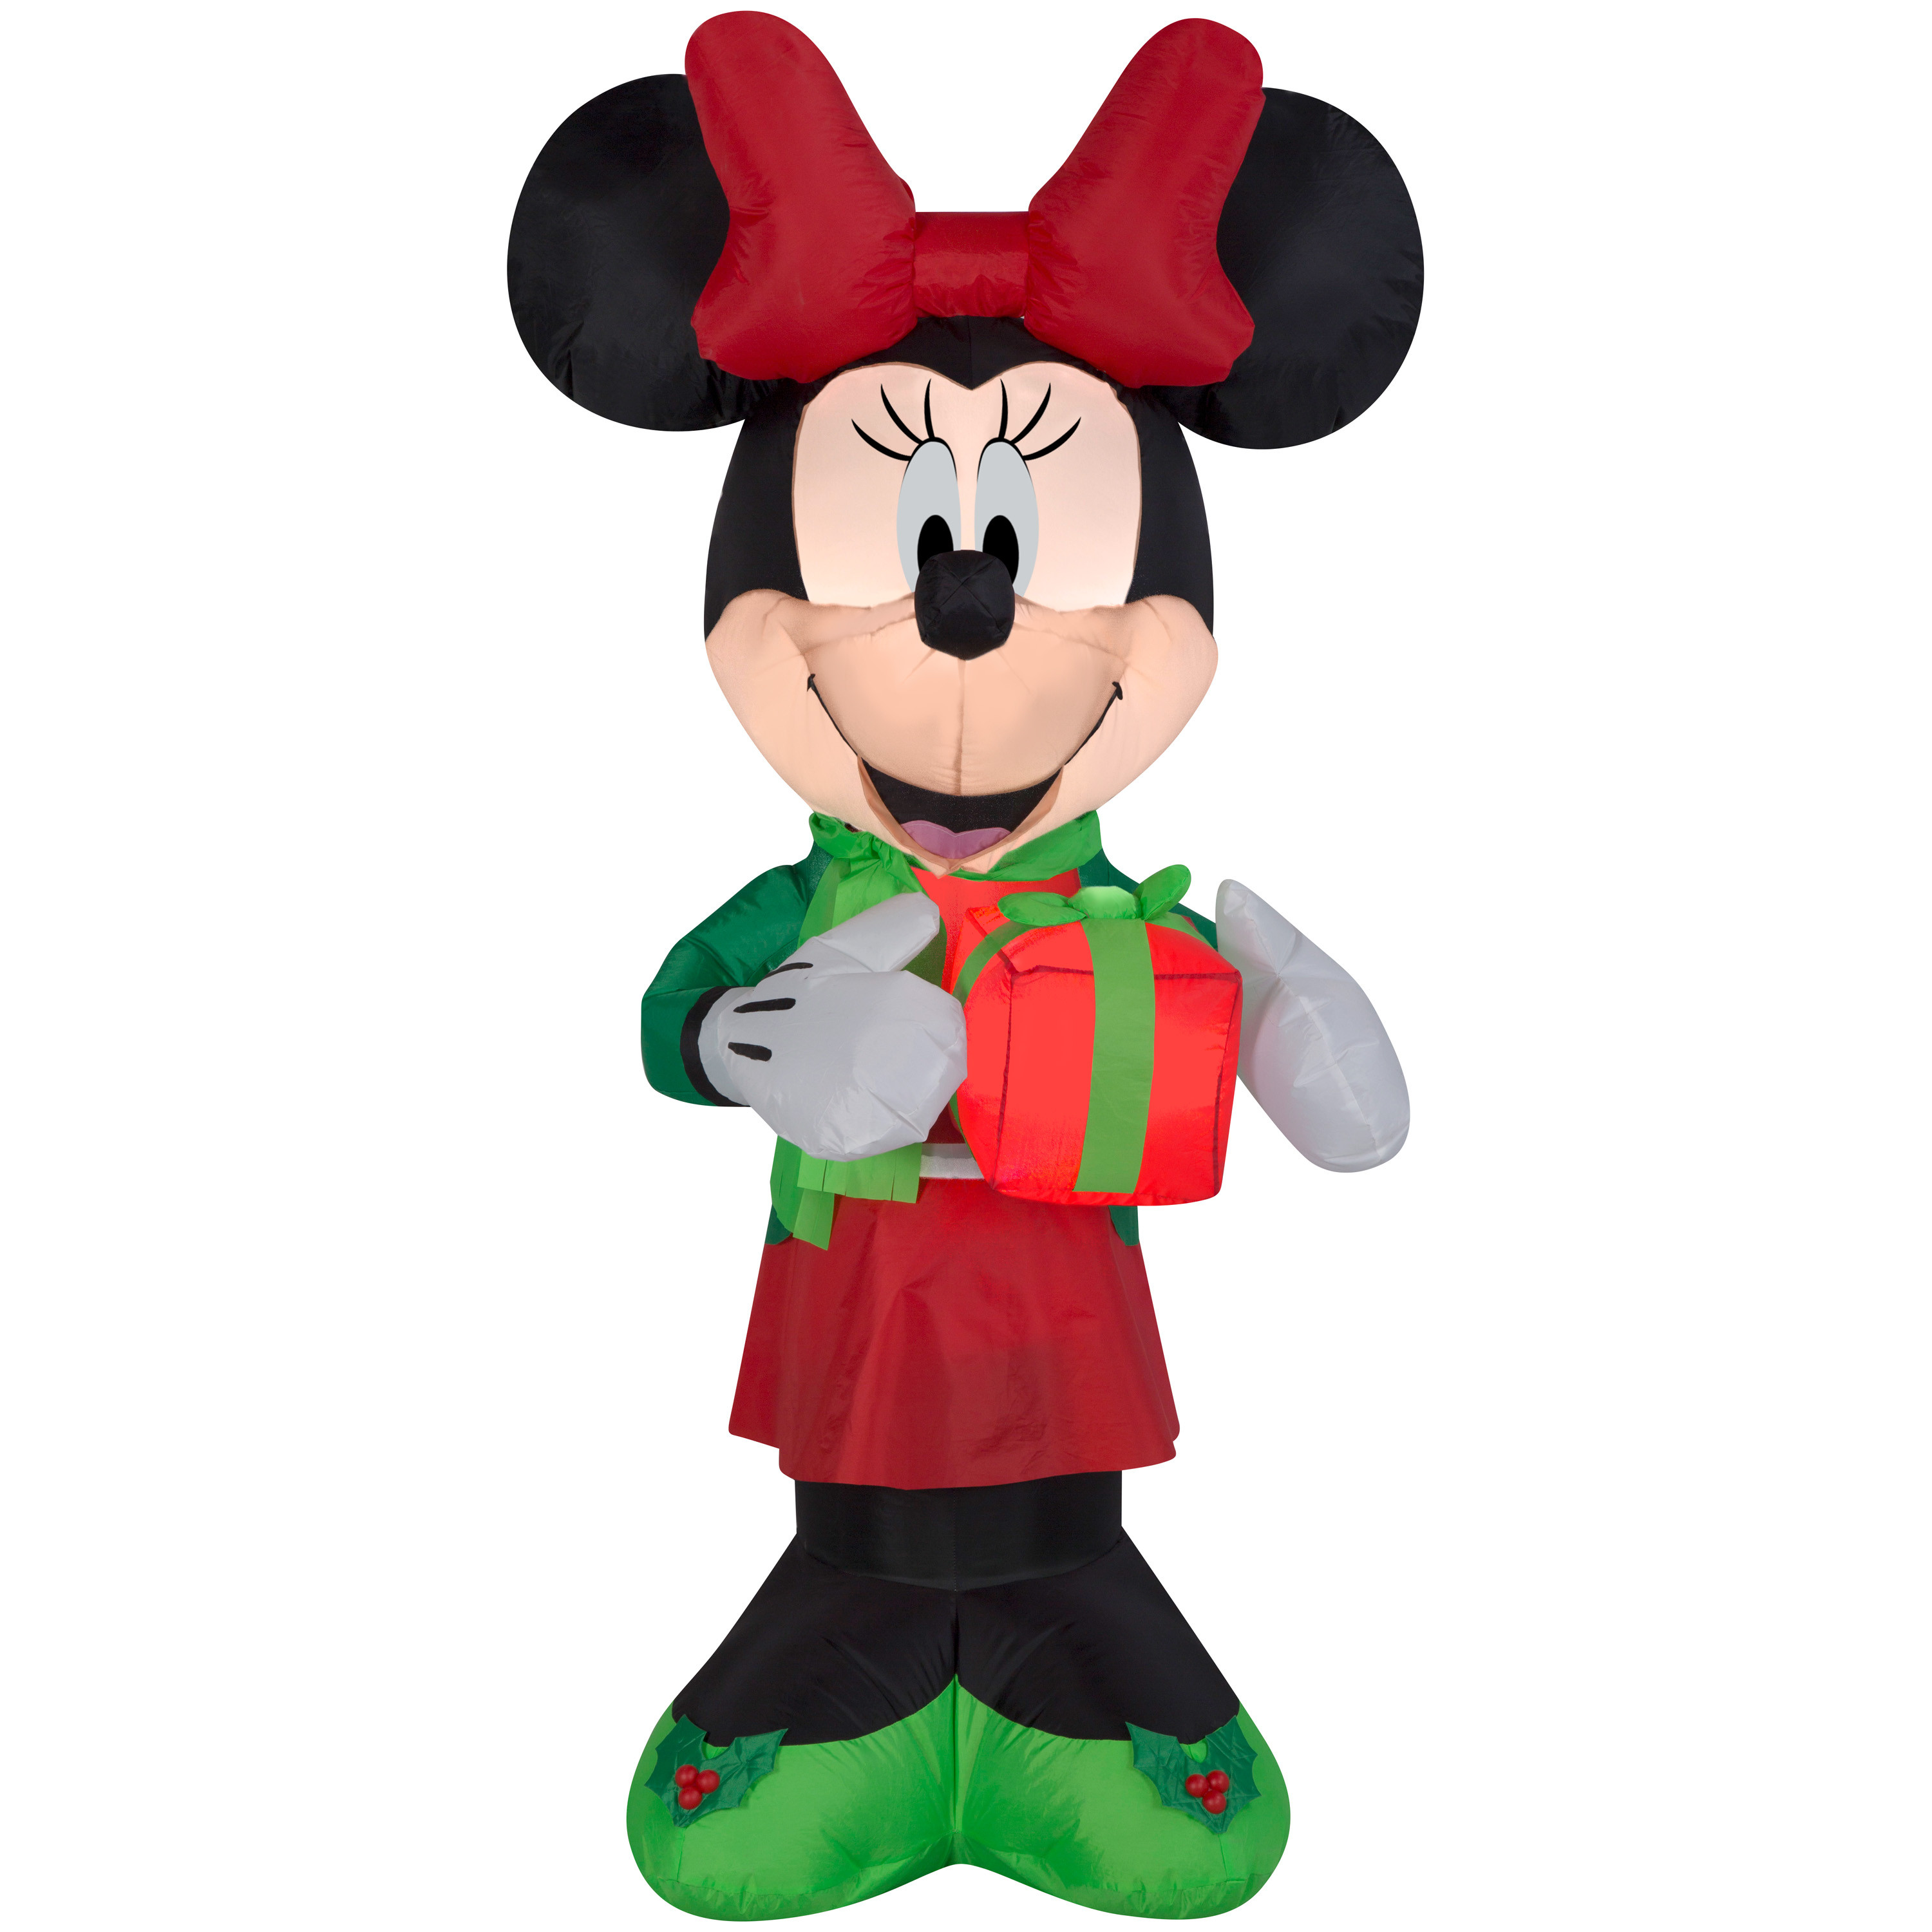 Disney Outdoor Christmas Decorations
 Awesome Christmas Inflatable Minnie Mouse Disney